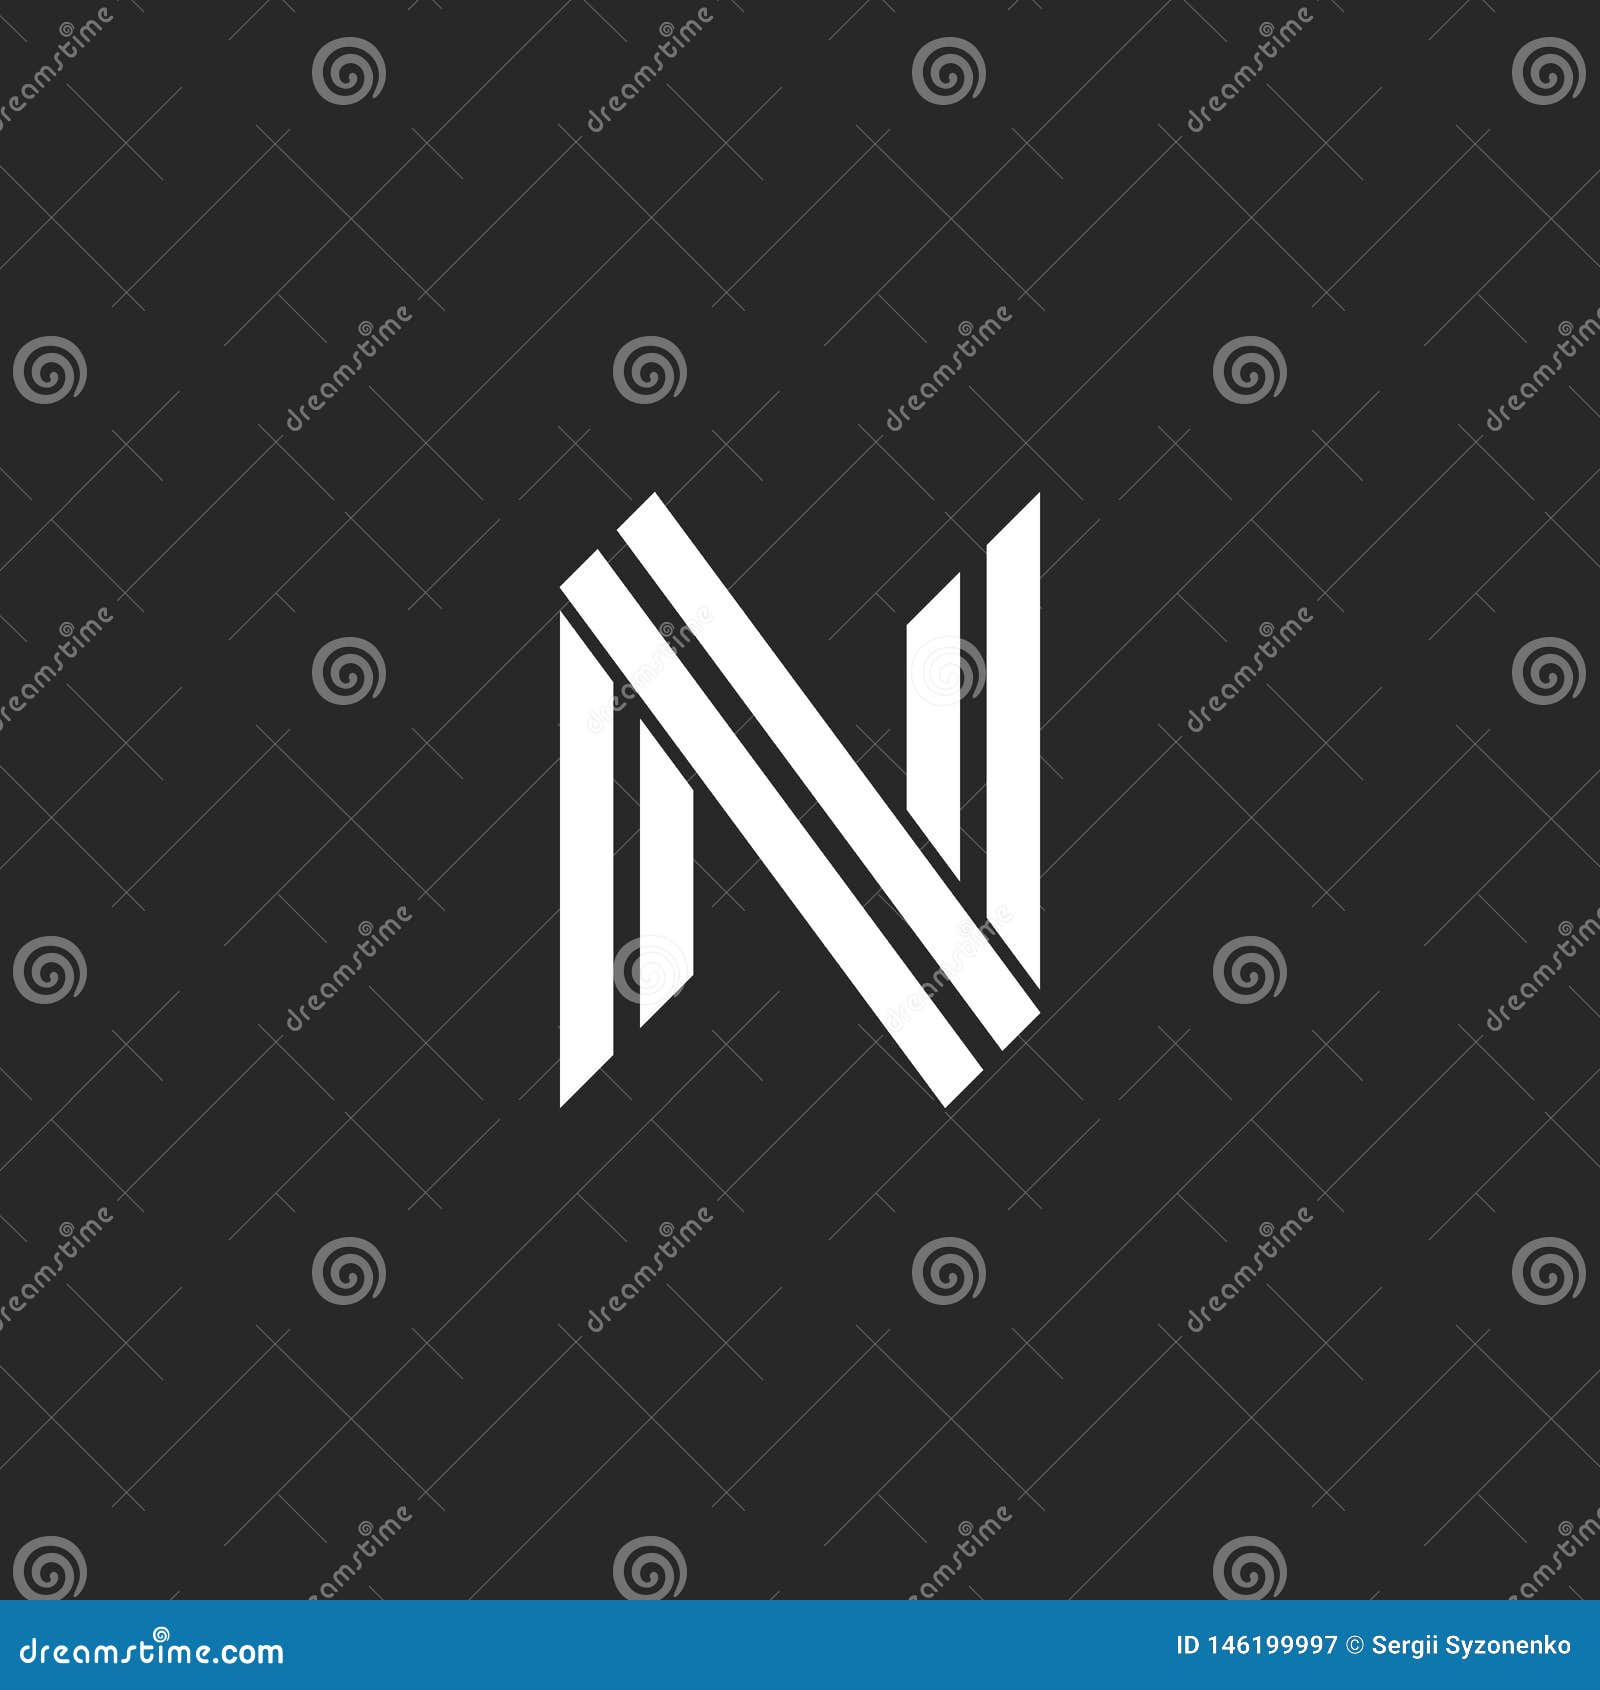 monogram letter n logo  two parallel lines hipster style